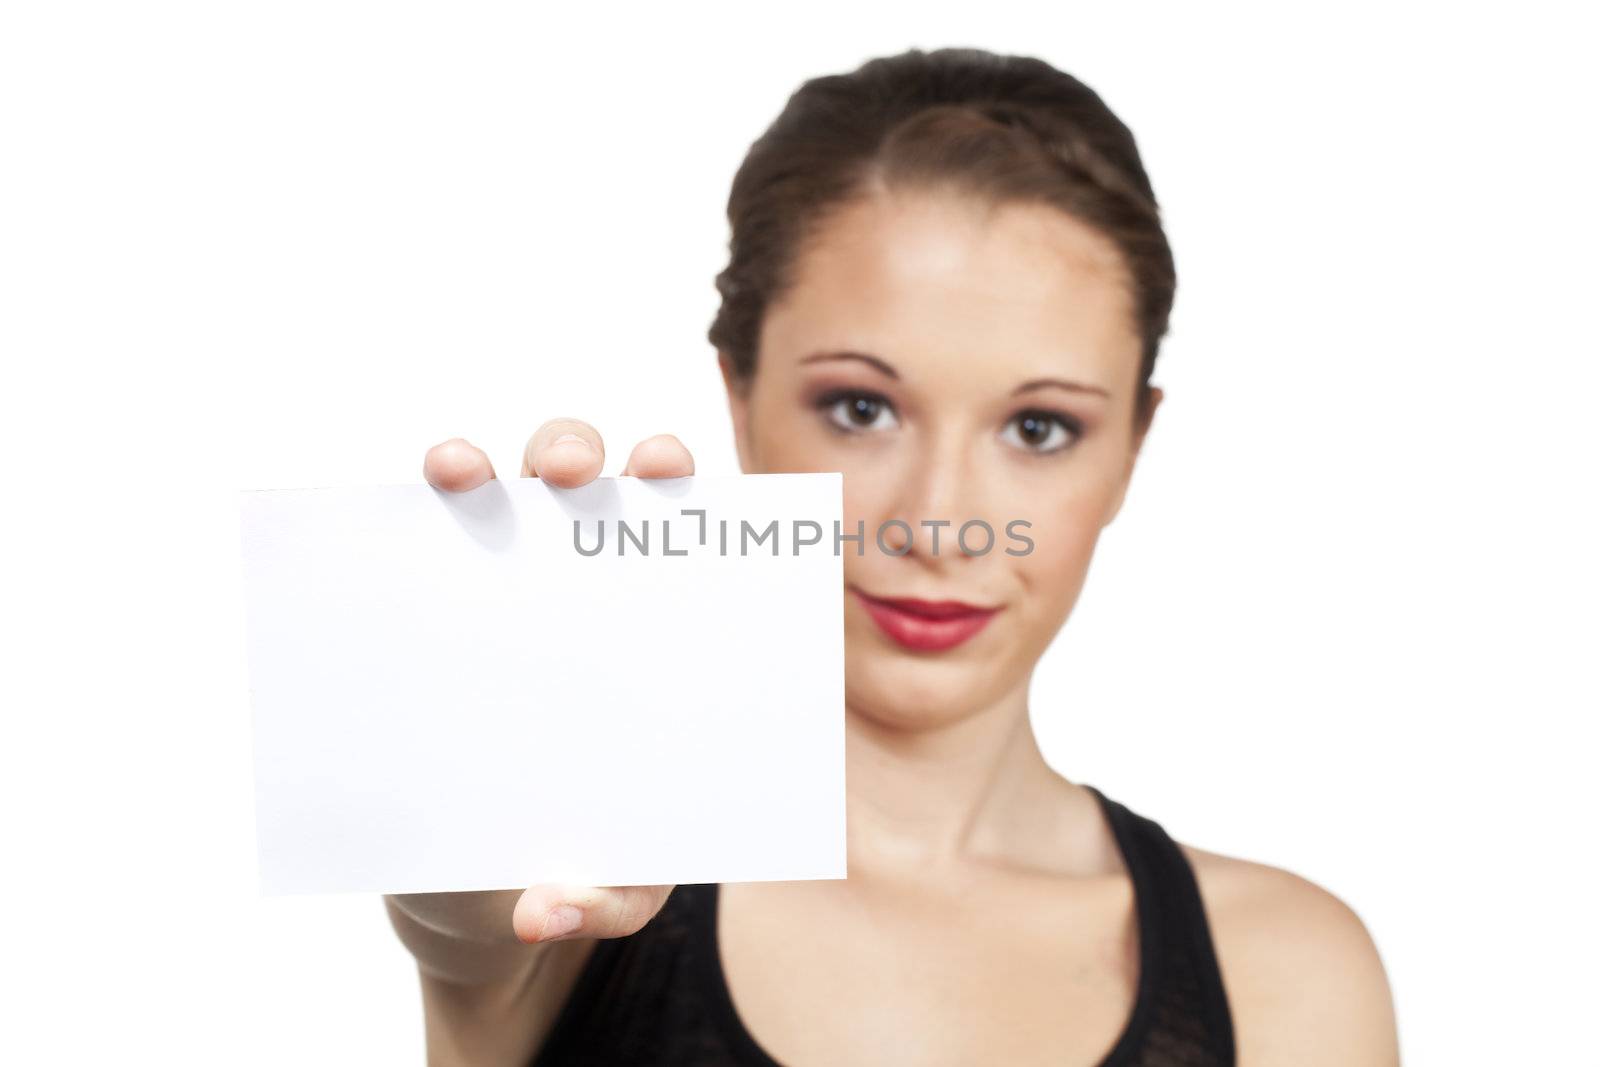 Blank white card is held up for designers to add in creative text message.